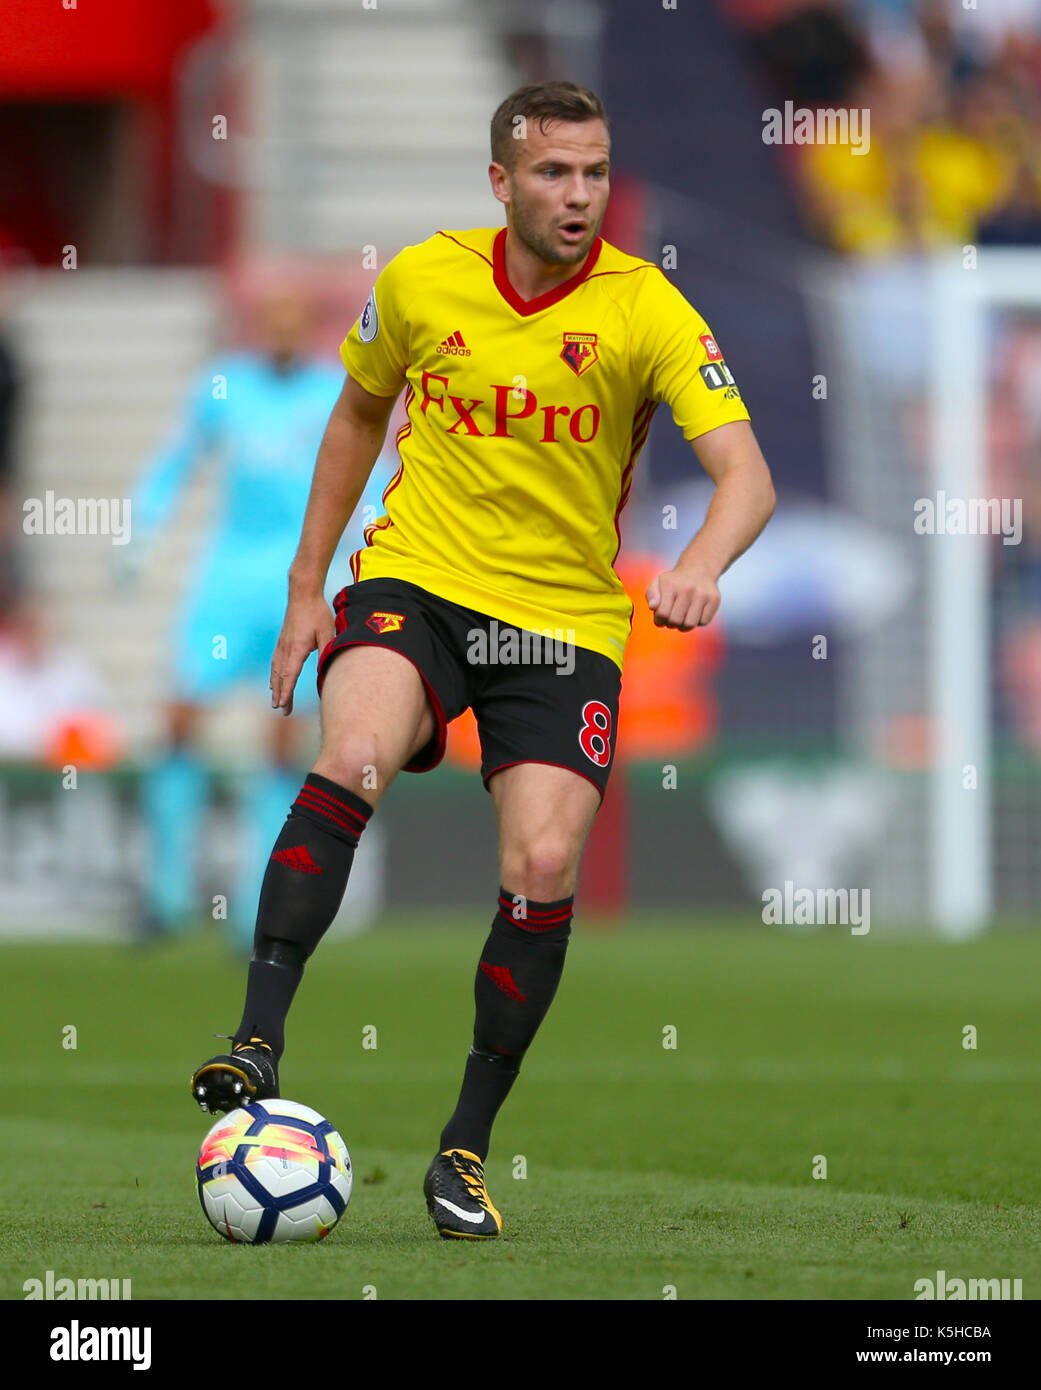 Watford's Tom Cleverley during the Premier League match at St Mary's Stadium, Southampton. PRESS ASSOCIATION Photo. Picture date: Saturday September 9, 2017. See PA story SOCCER Southampton. Photo credit should read: Steven Paston/PA Wire. RESTRICTIONS: No use with unauthorised audio, video, data, fixture lists, club/league logos or 'live' services. Online in-match use limited to 75 images, no video emulation. No use in betting, games or single club/league/player publications. Stock Photo